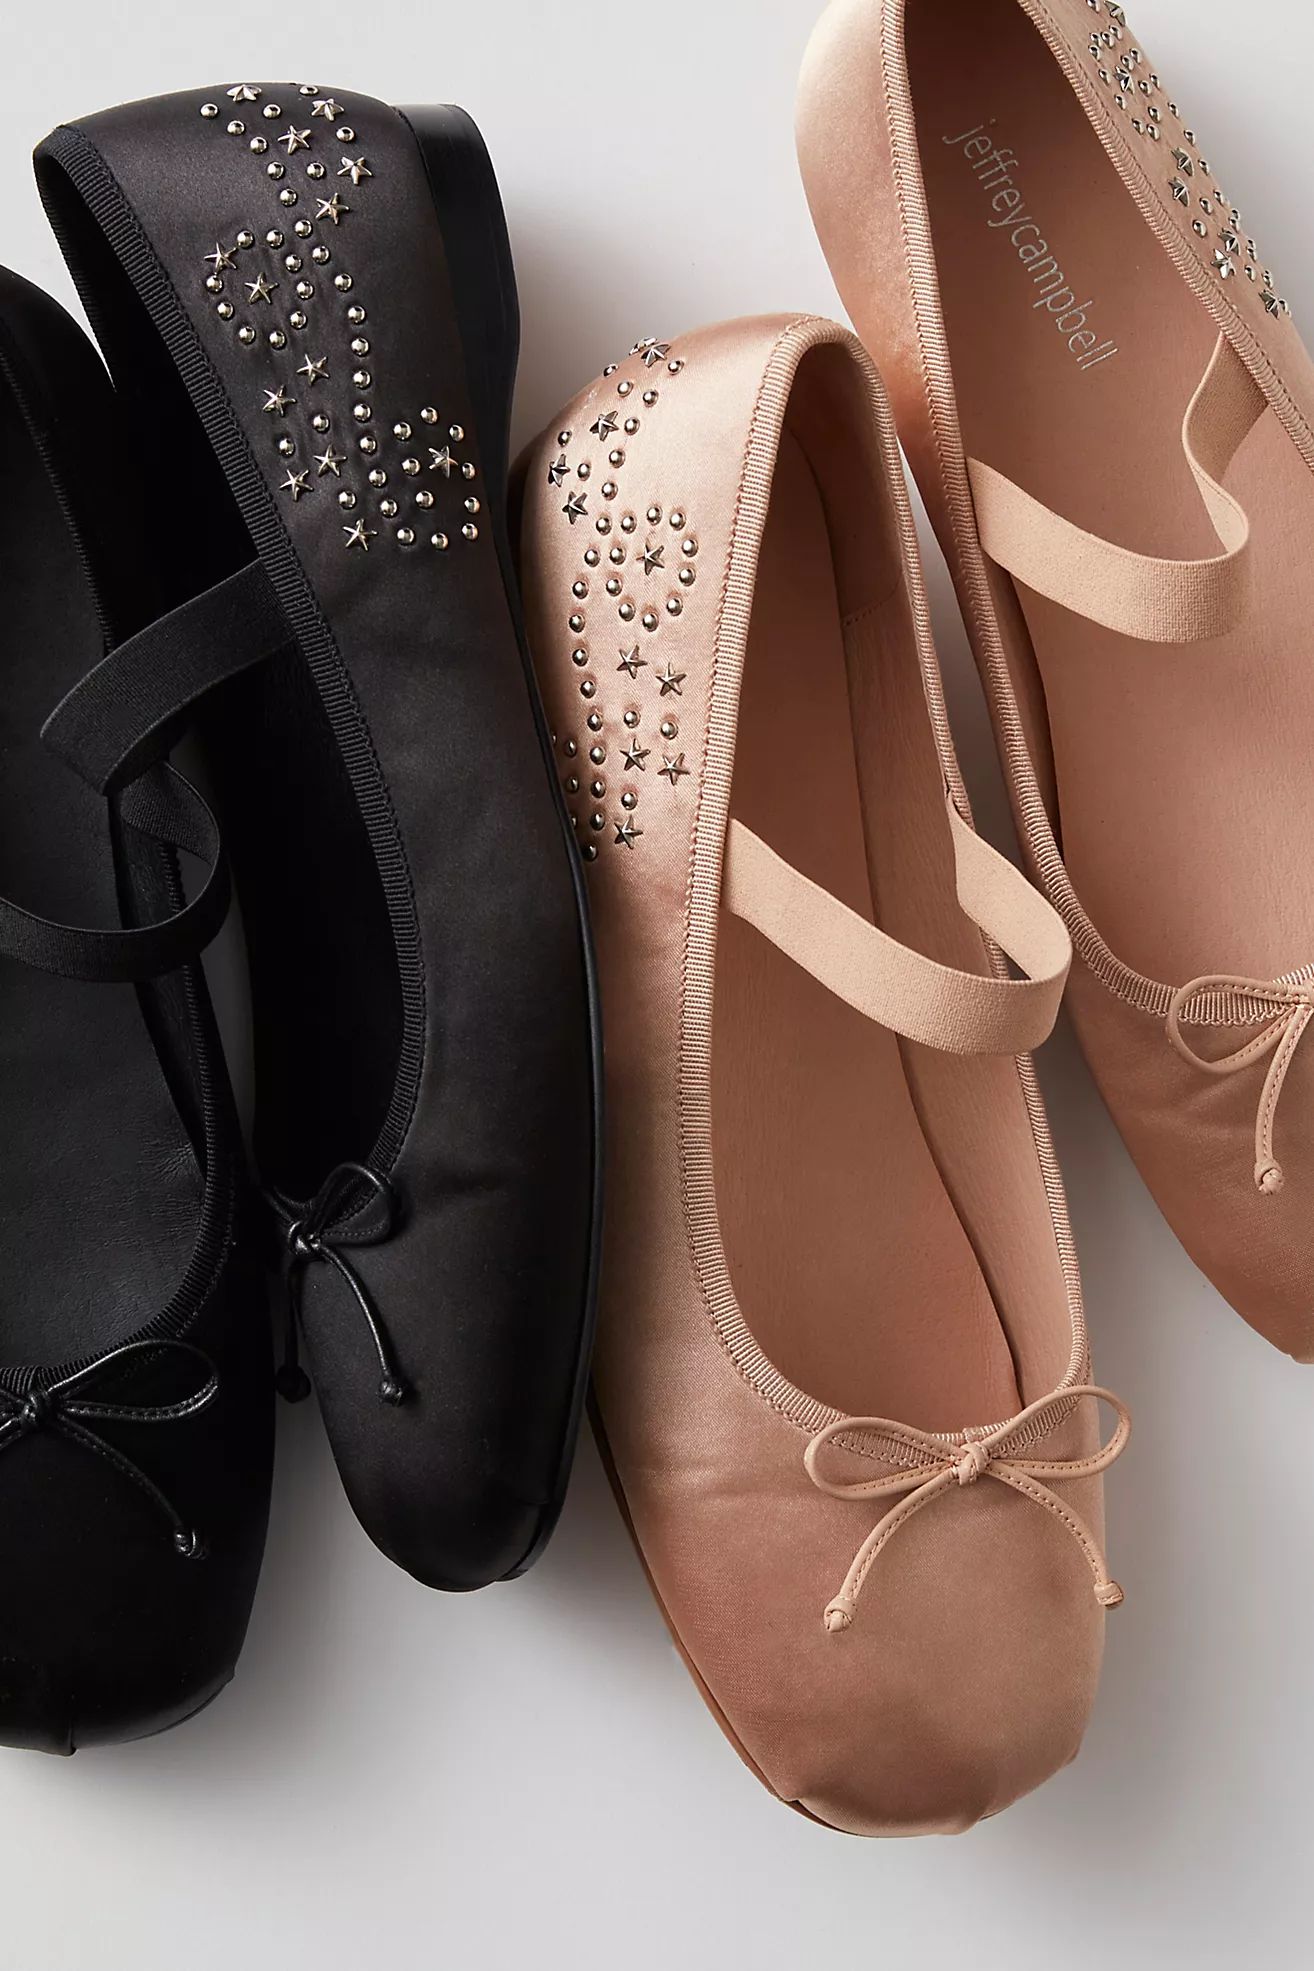 Jeffrey Campbell x FP x Understated Leather Stars Align Ballet Flats | Free People (Global - UK&FR Excluded)